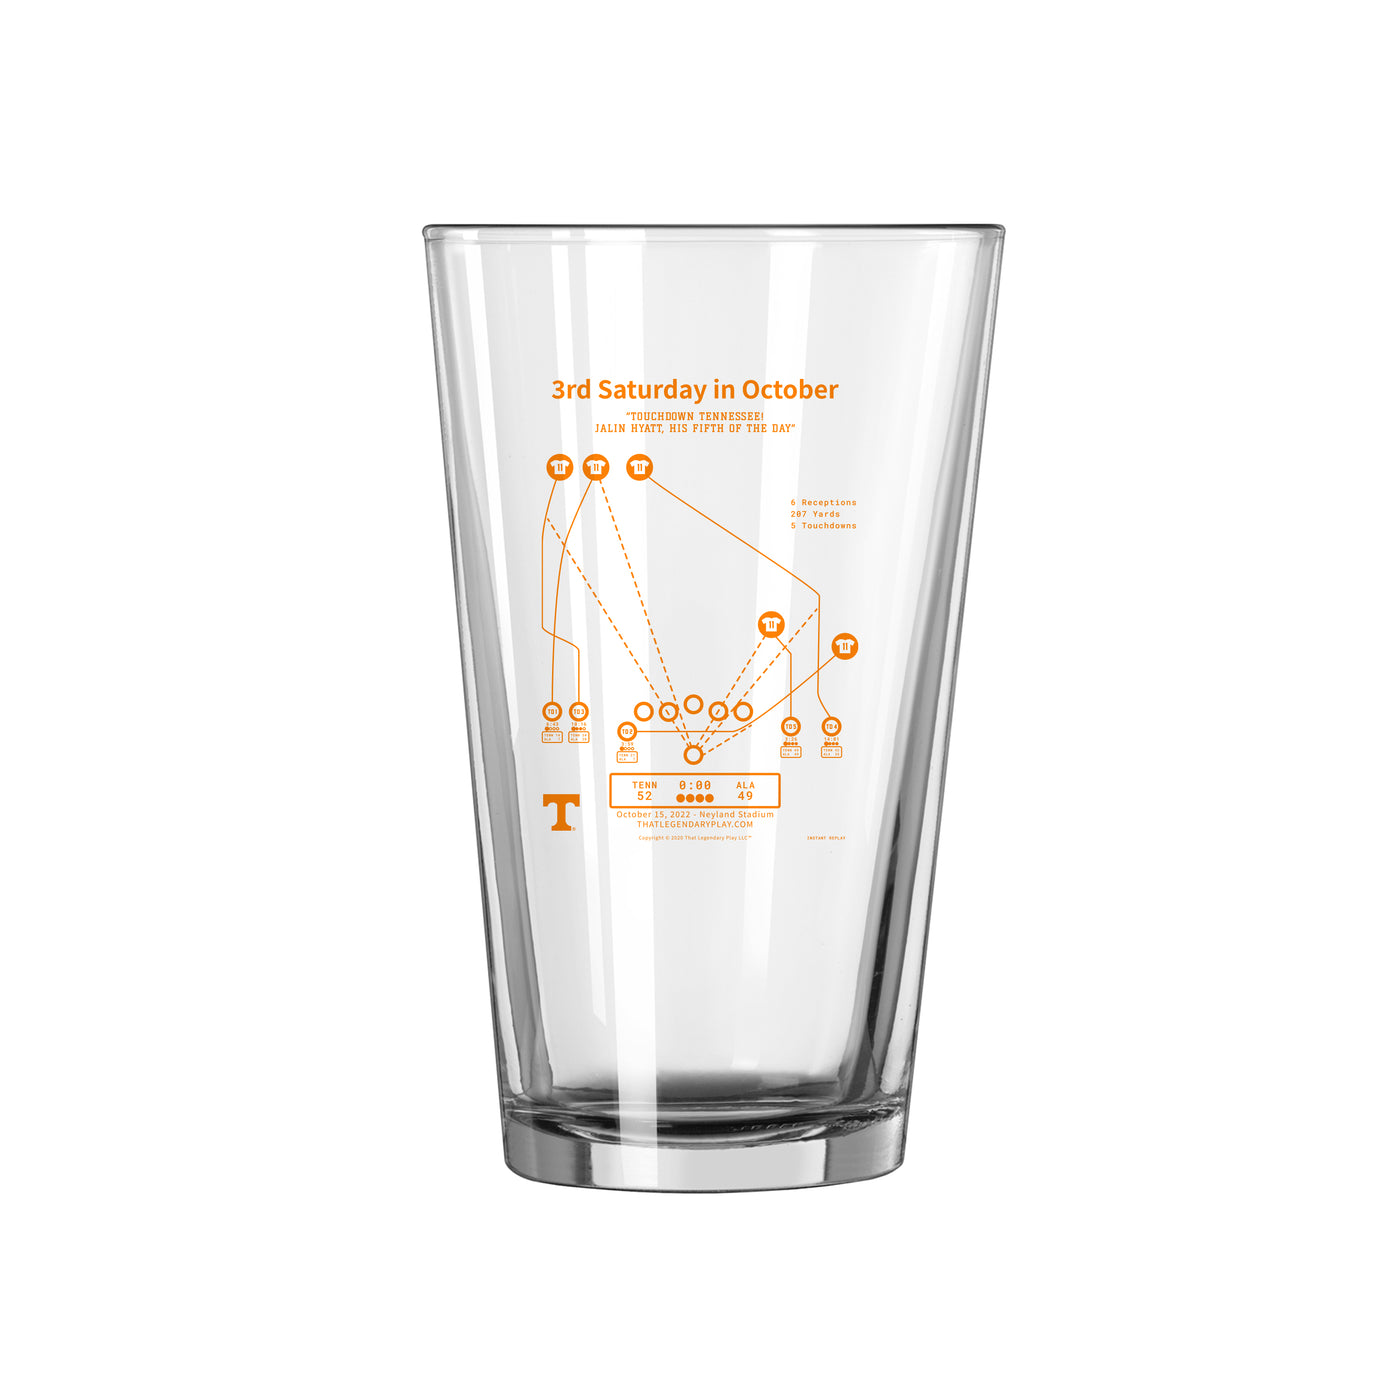 Tennessee Legendary Play 3rd Saturday in October 16oz Pint Glass